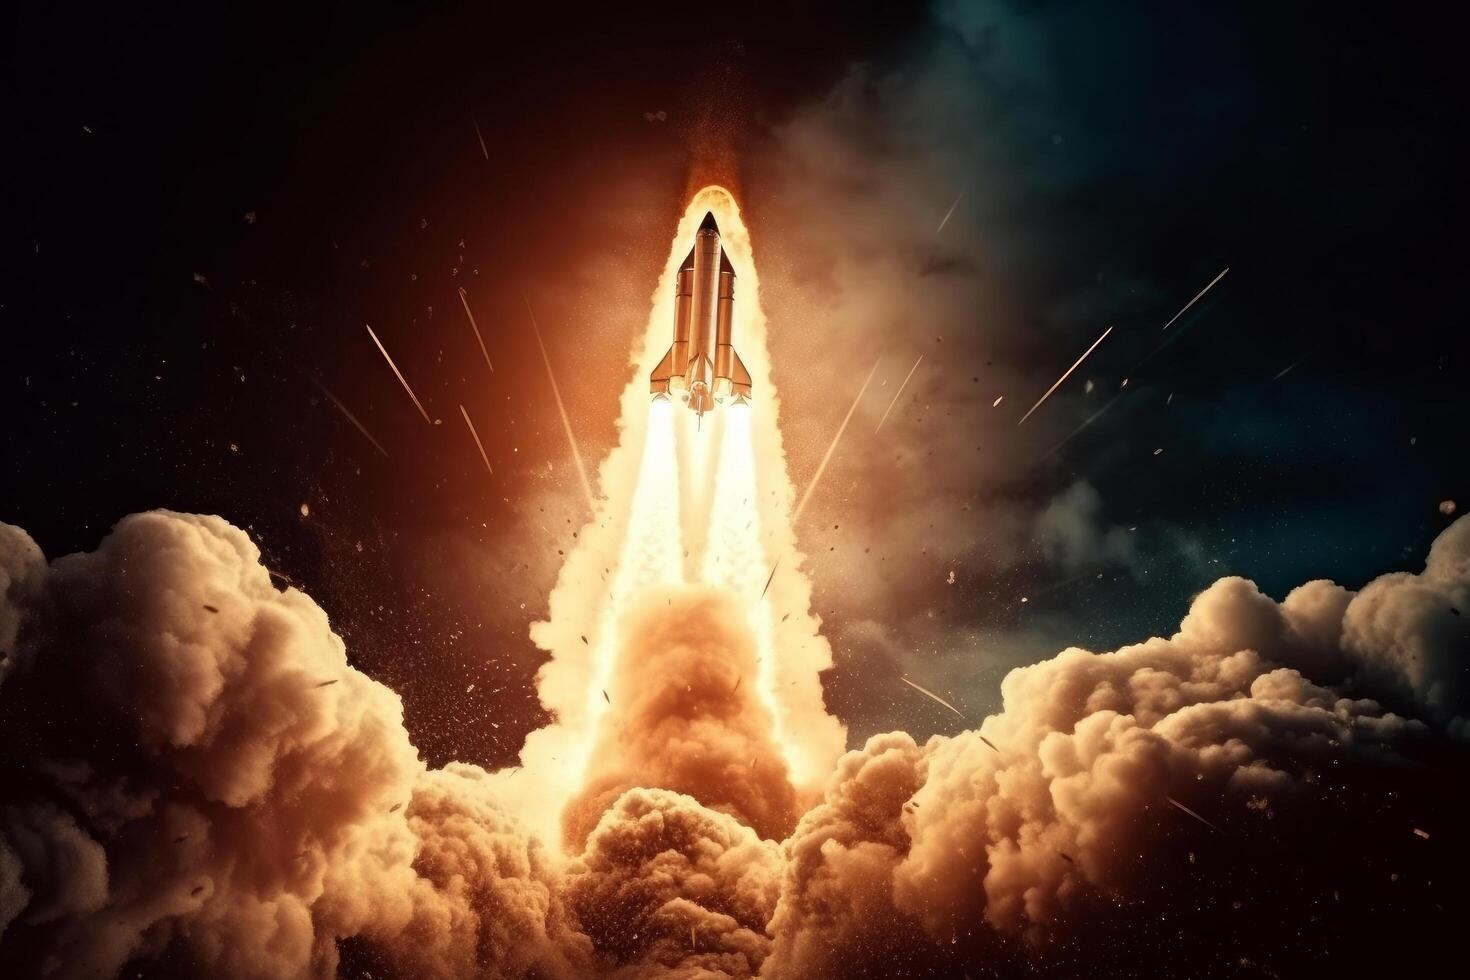 Space wallpaper rocket launch explosion with fire exploding. Illustration photo